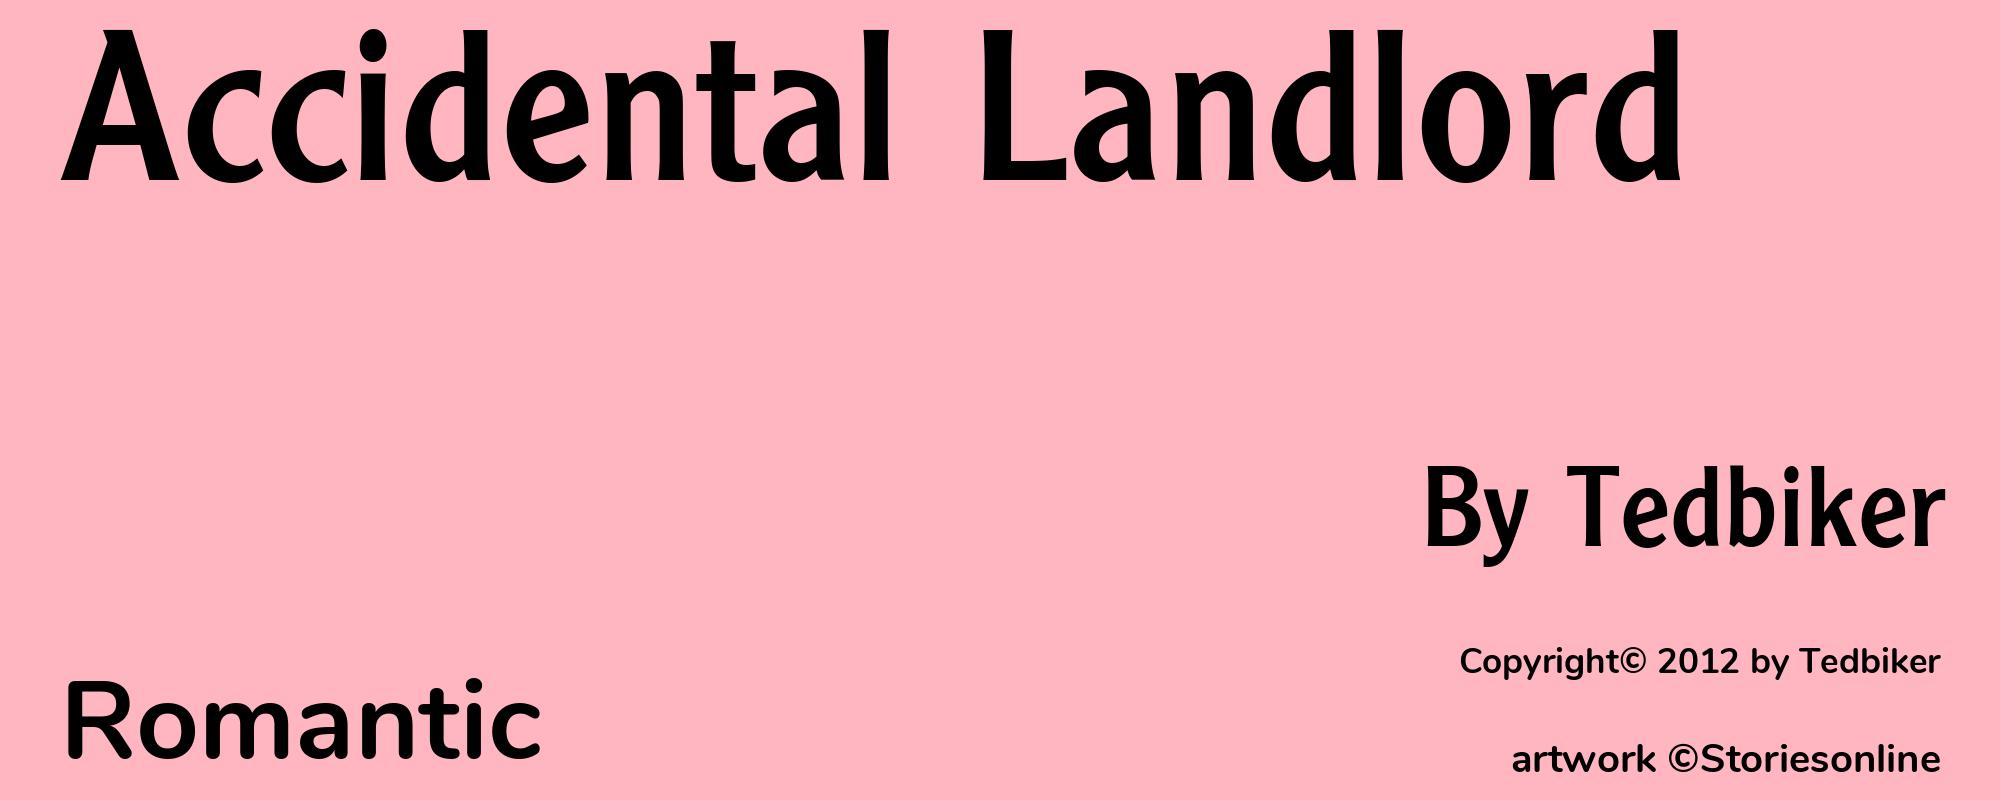 Accidental Landlord - Cover